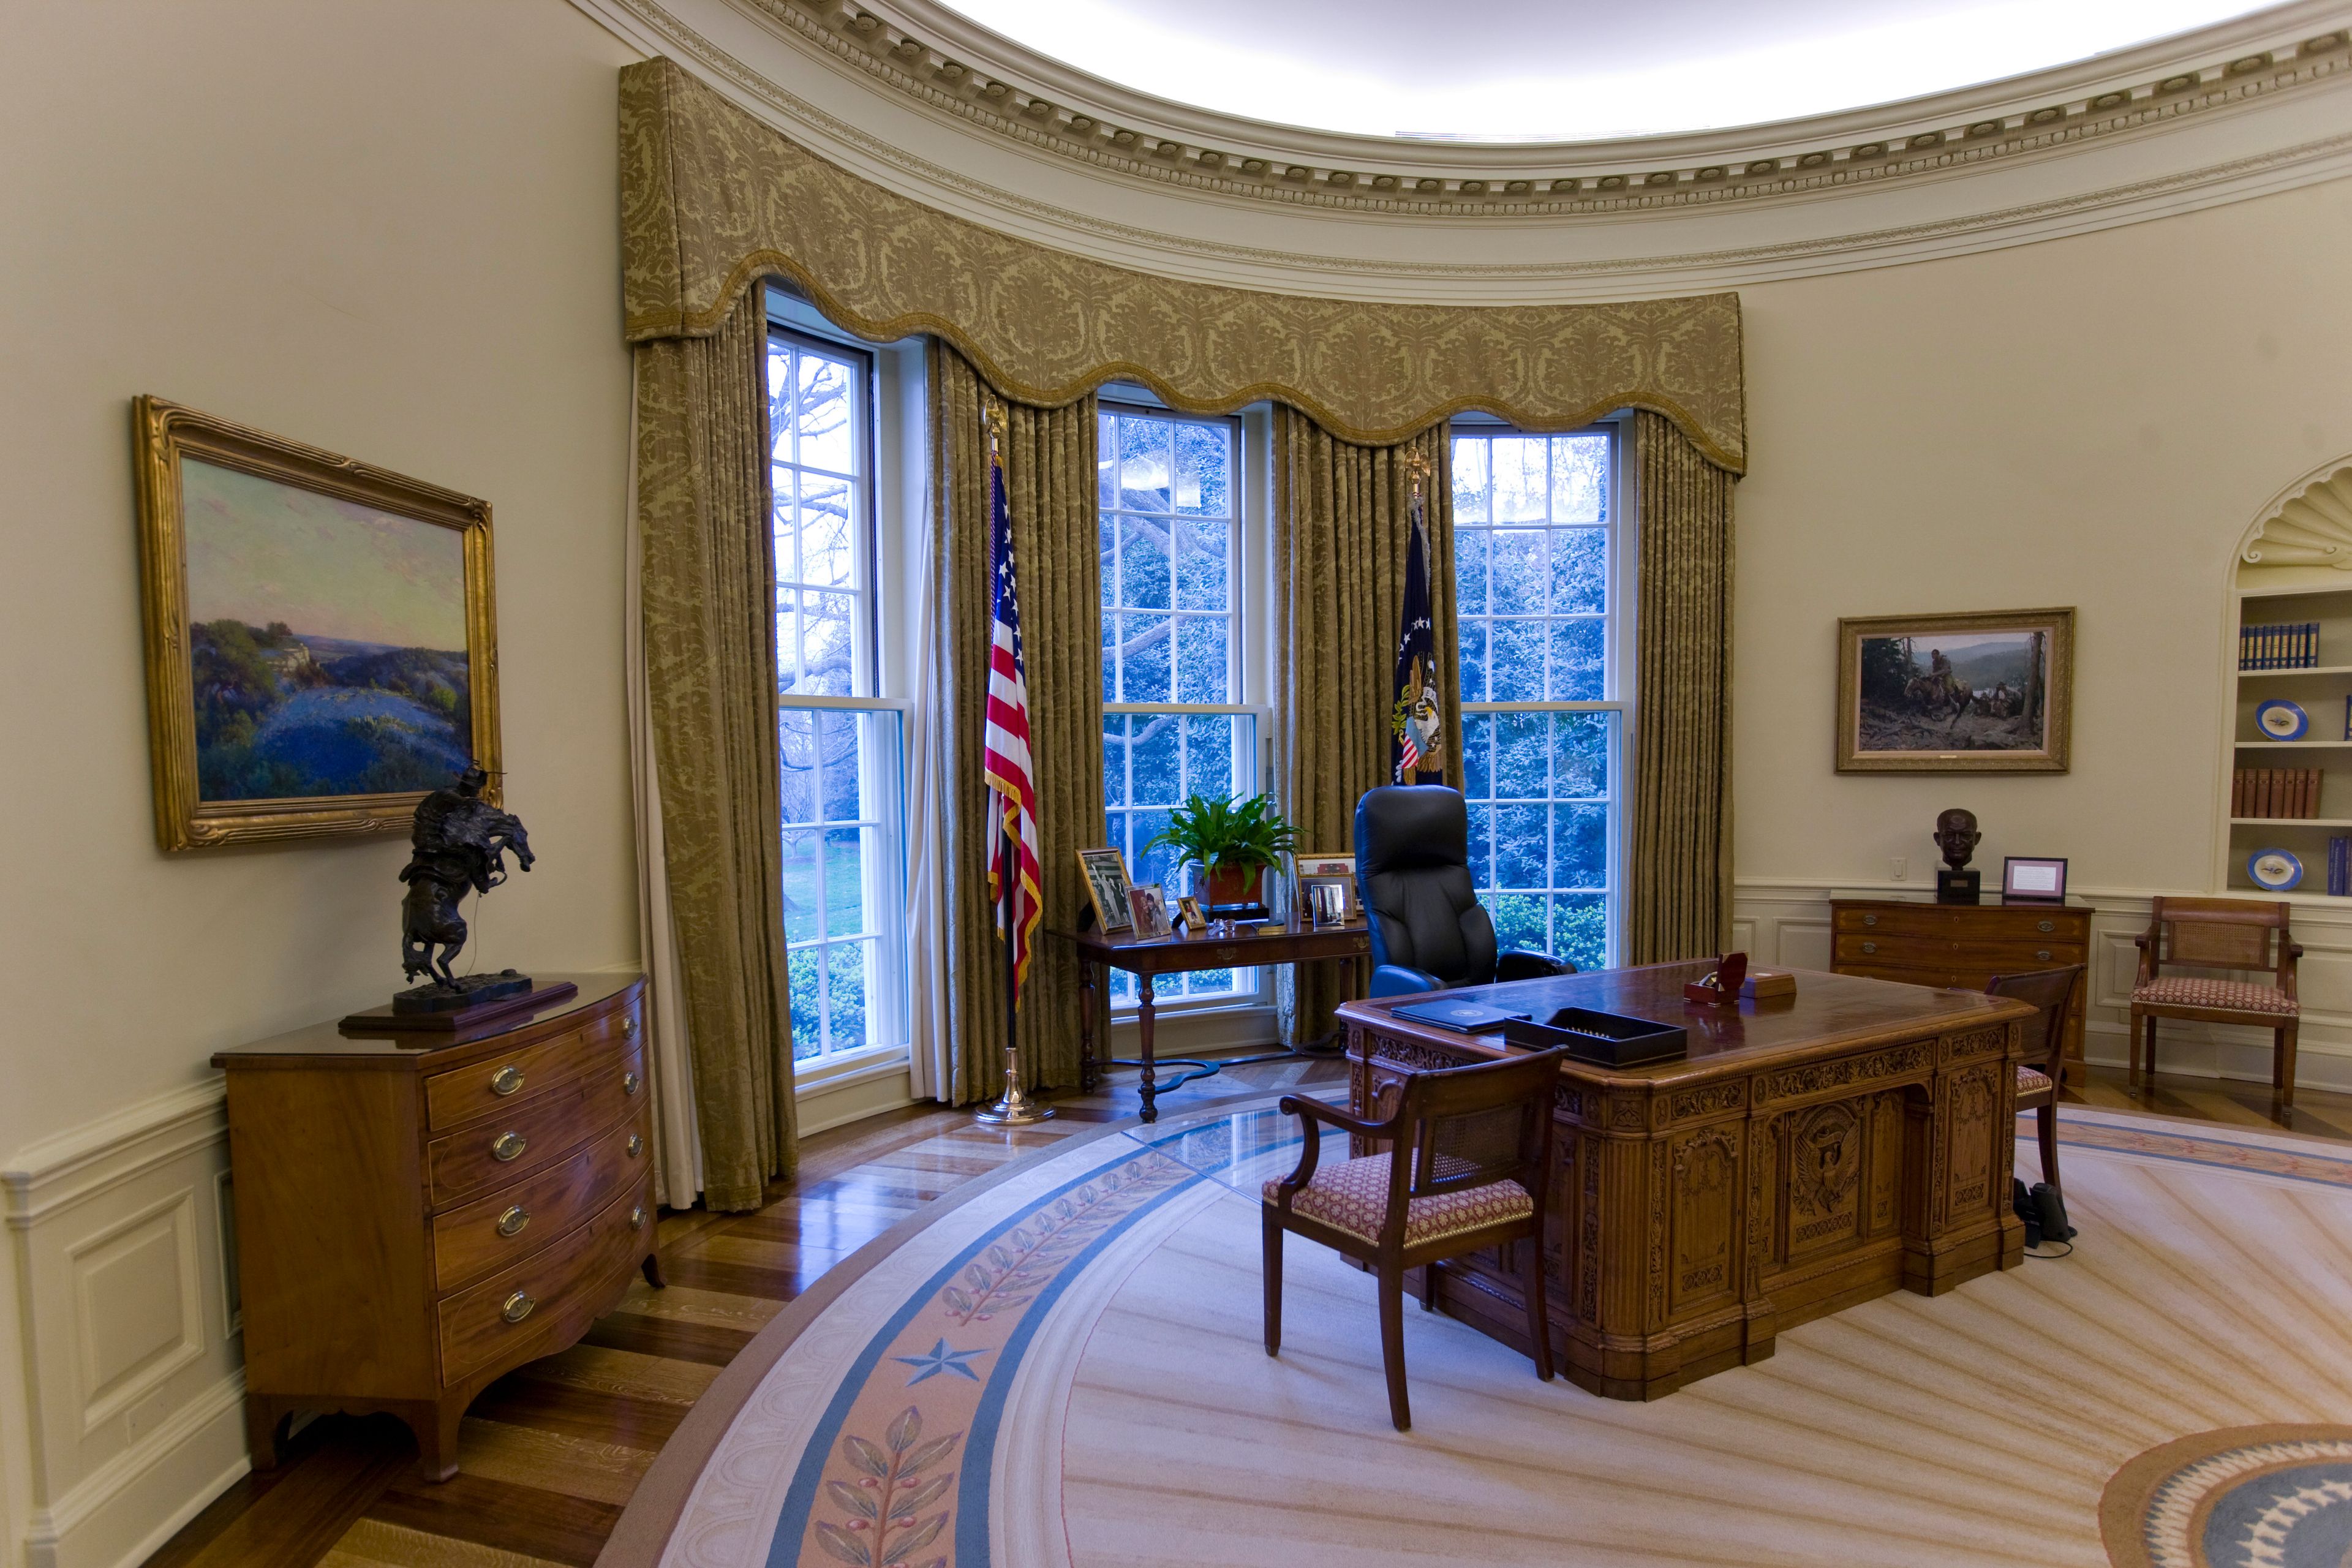 USA &#8211; Politics &#8211; The Oval Office of the White House